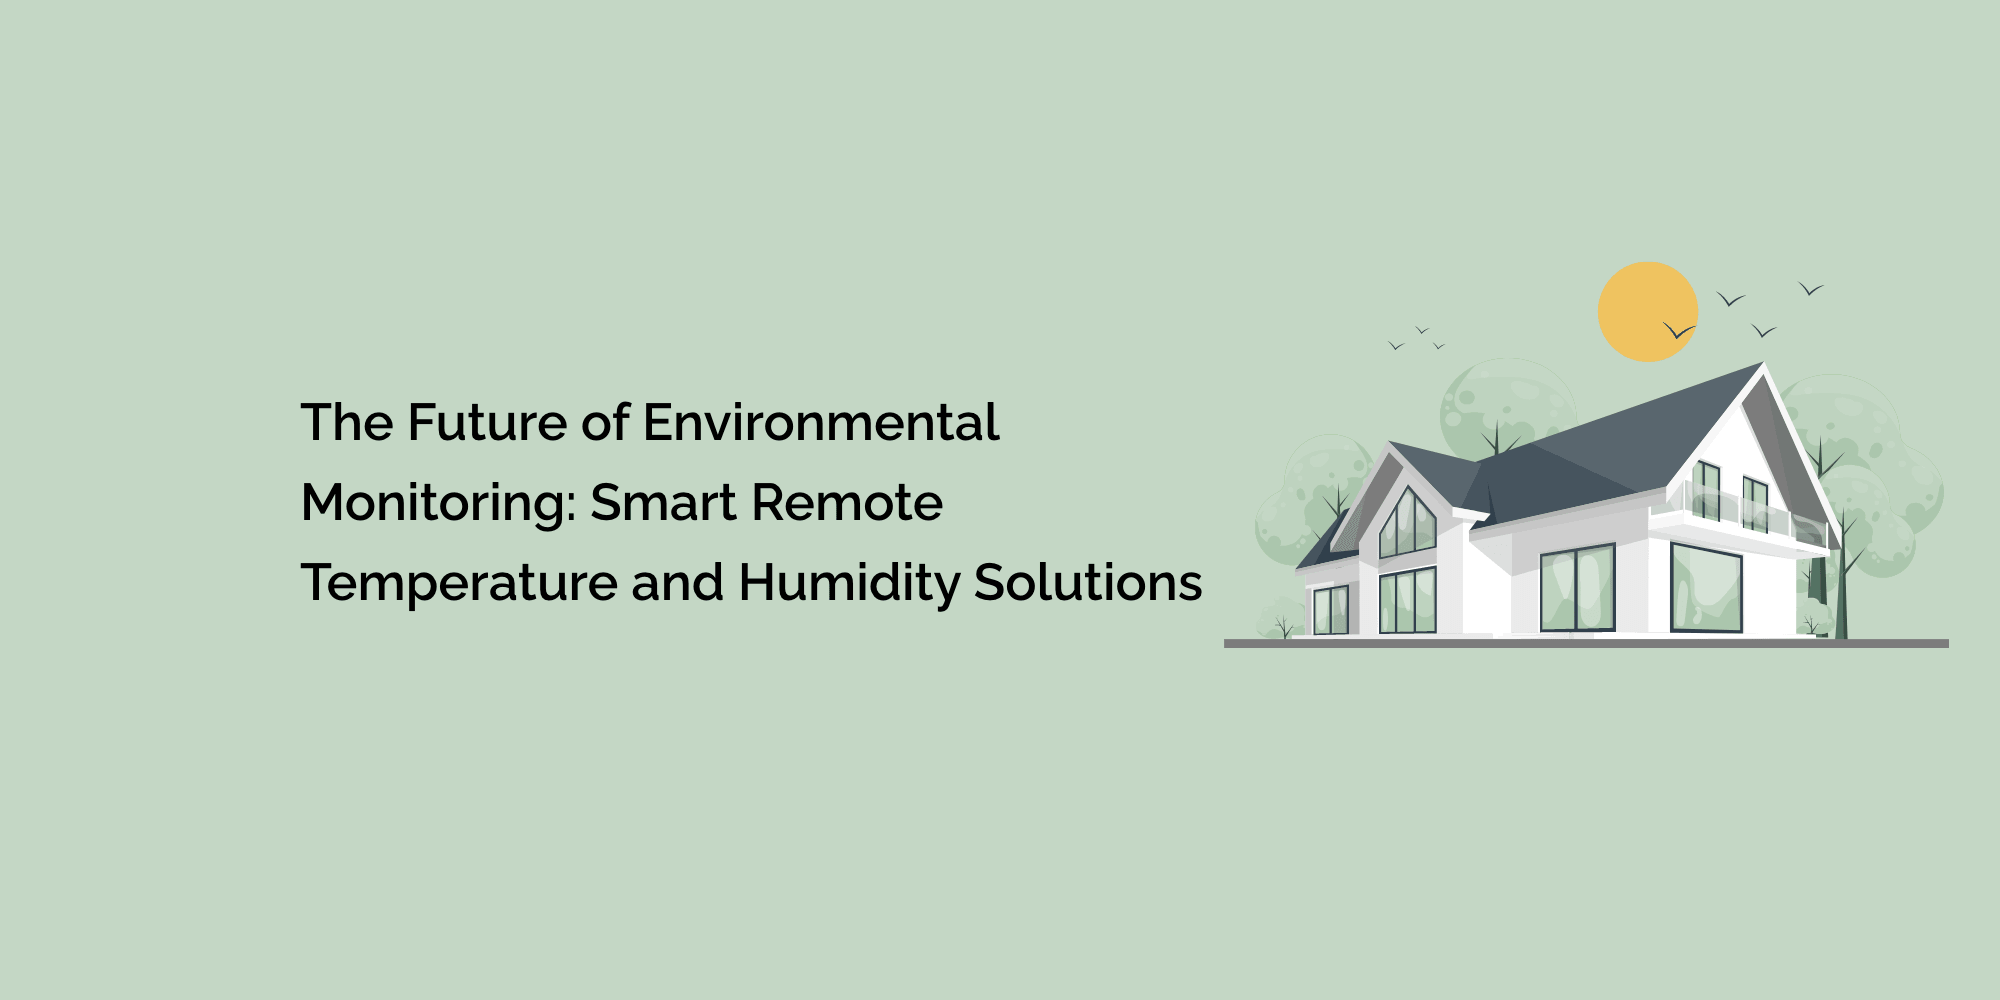 The Future of Environmental Monitoring: Smart Remote Temperature and Humidity Solutions